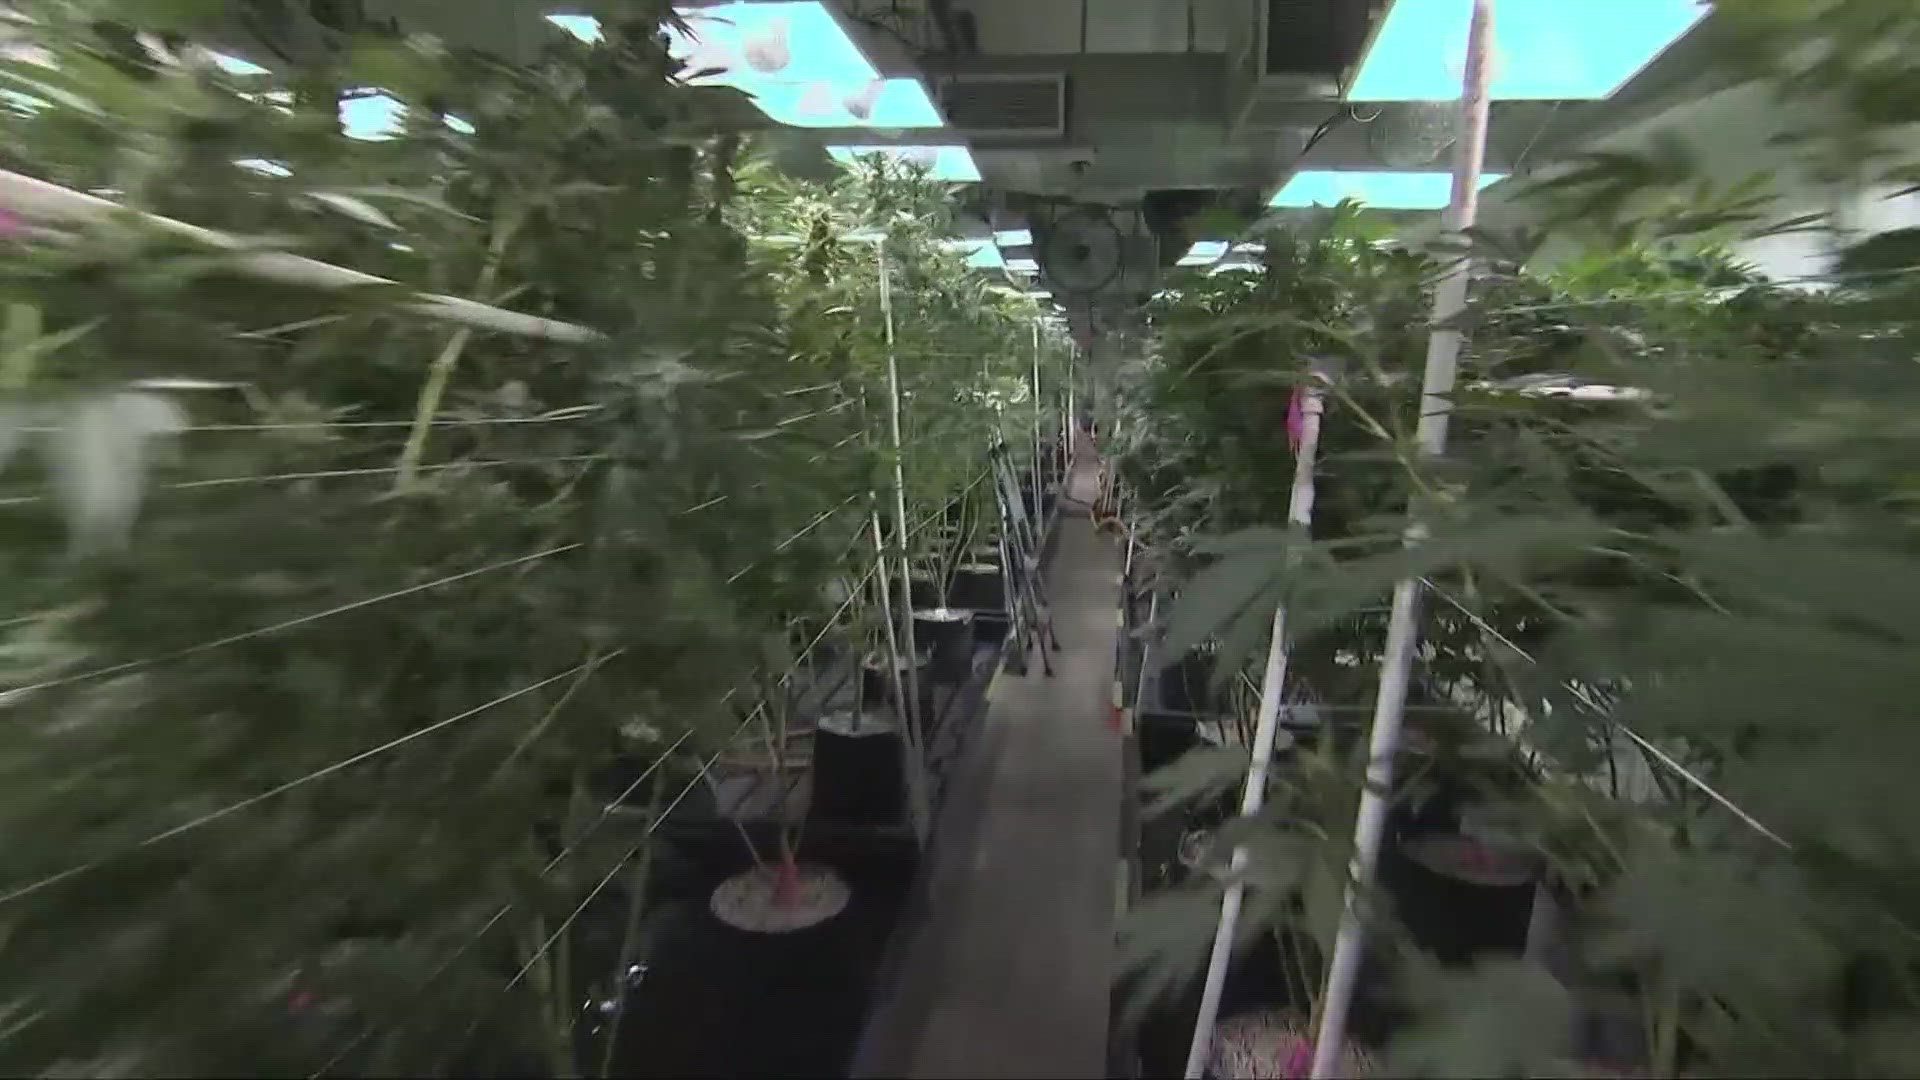 Ohioans will vote whether or not to approve recreational use in November.